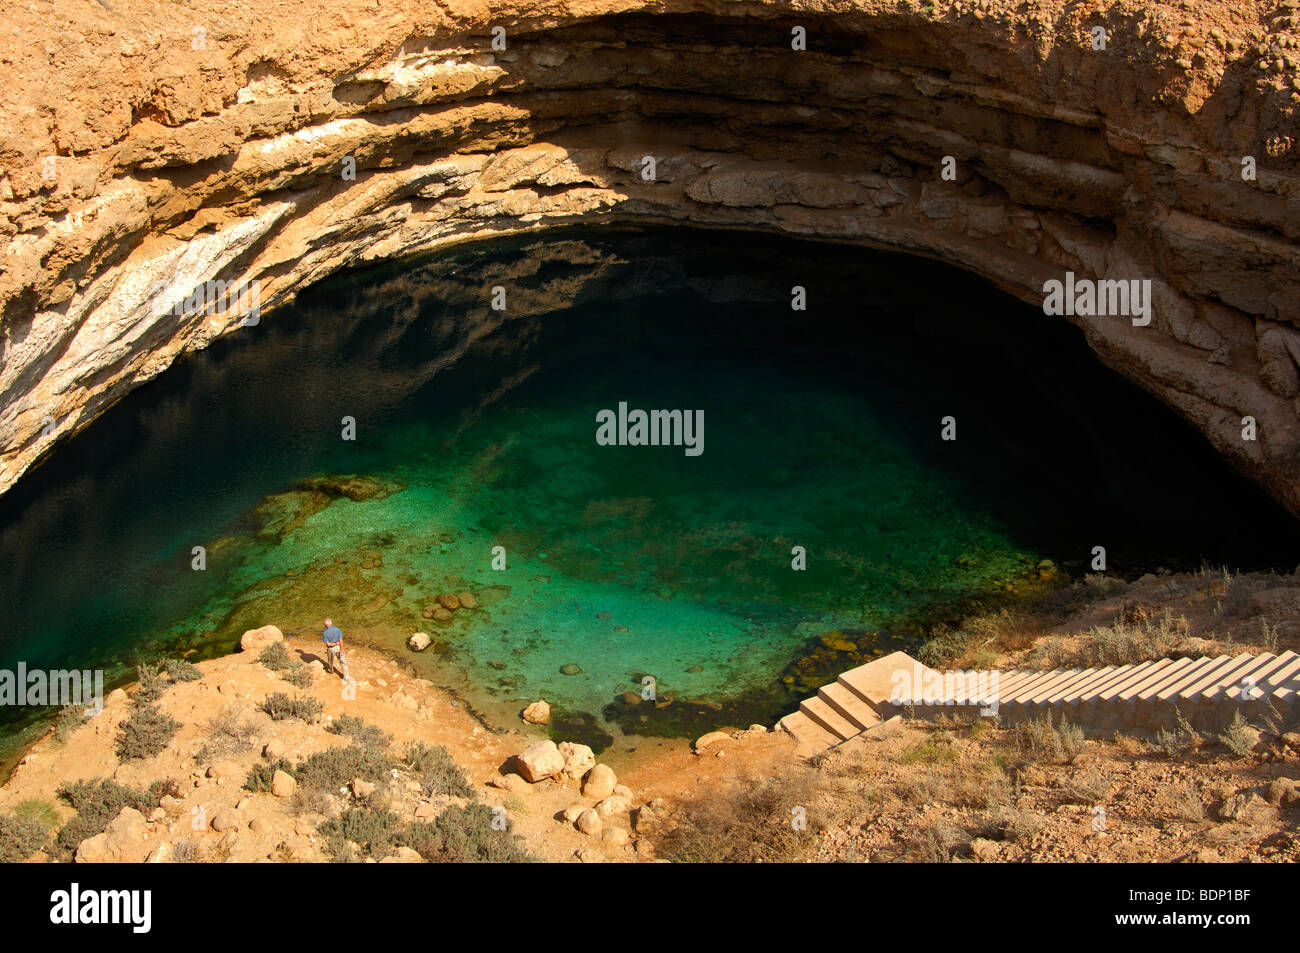 Turquoise water on the base of a limestone crater, Dibab Lake Park, Bamah, Sultanate of Oman, Near East Stock Photo